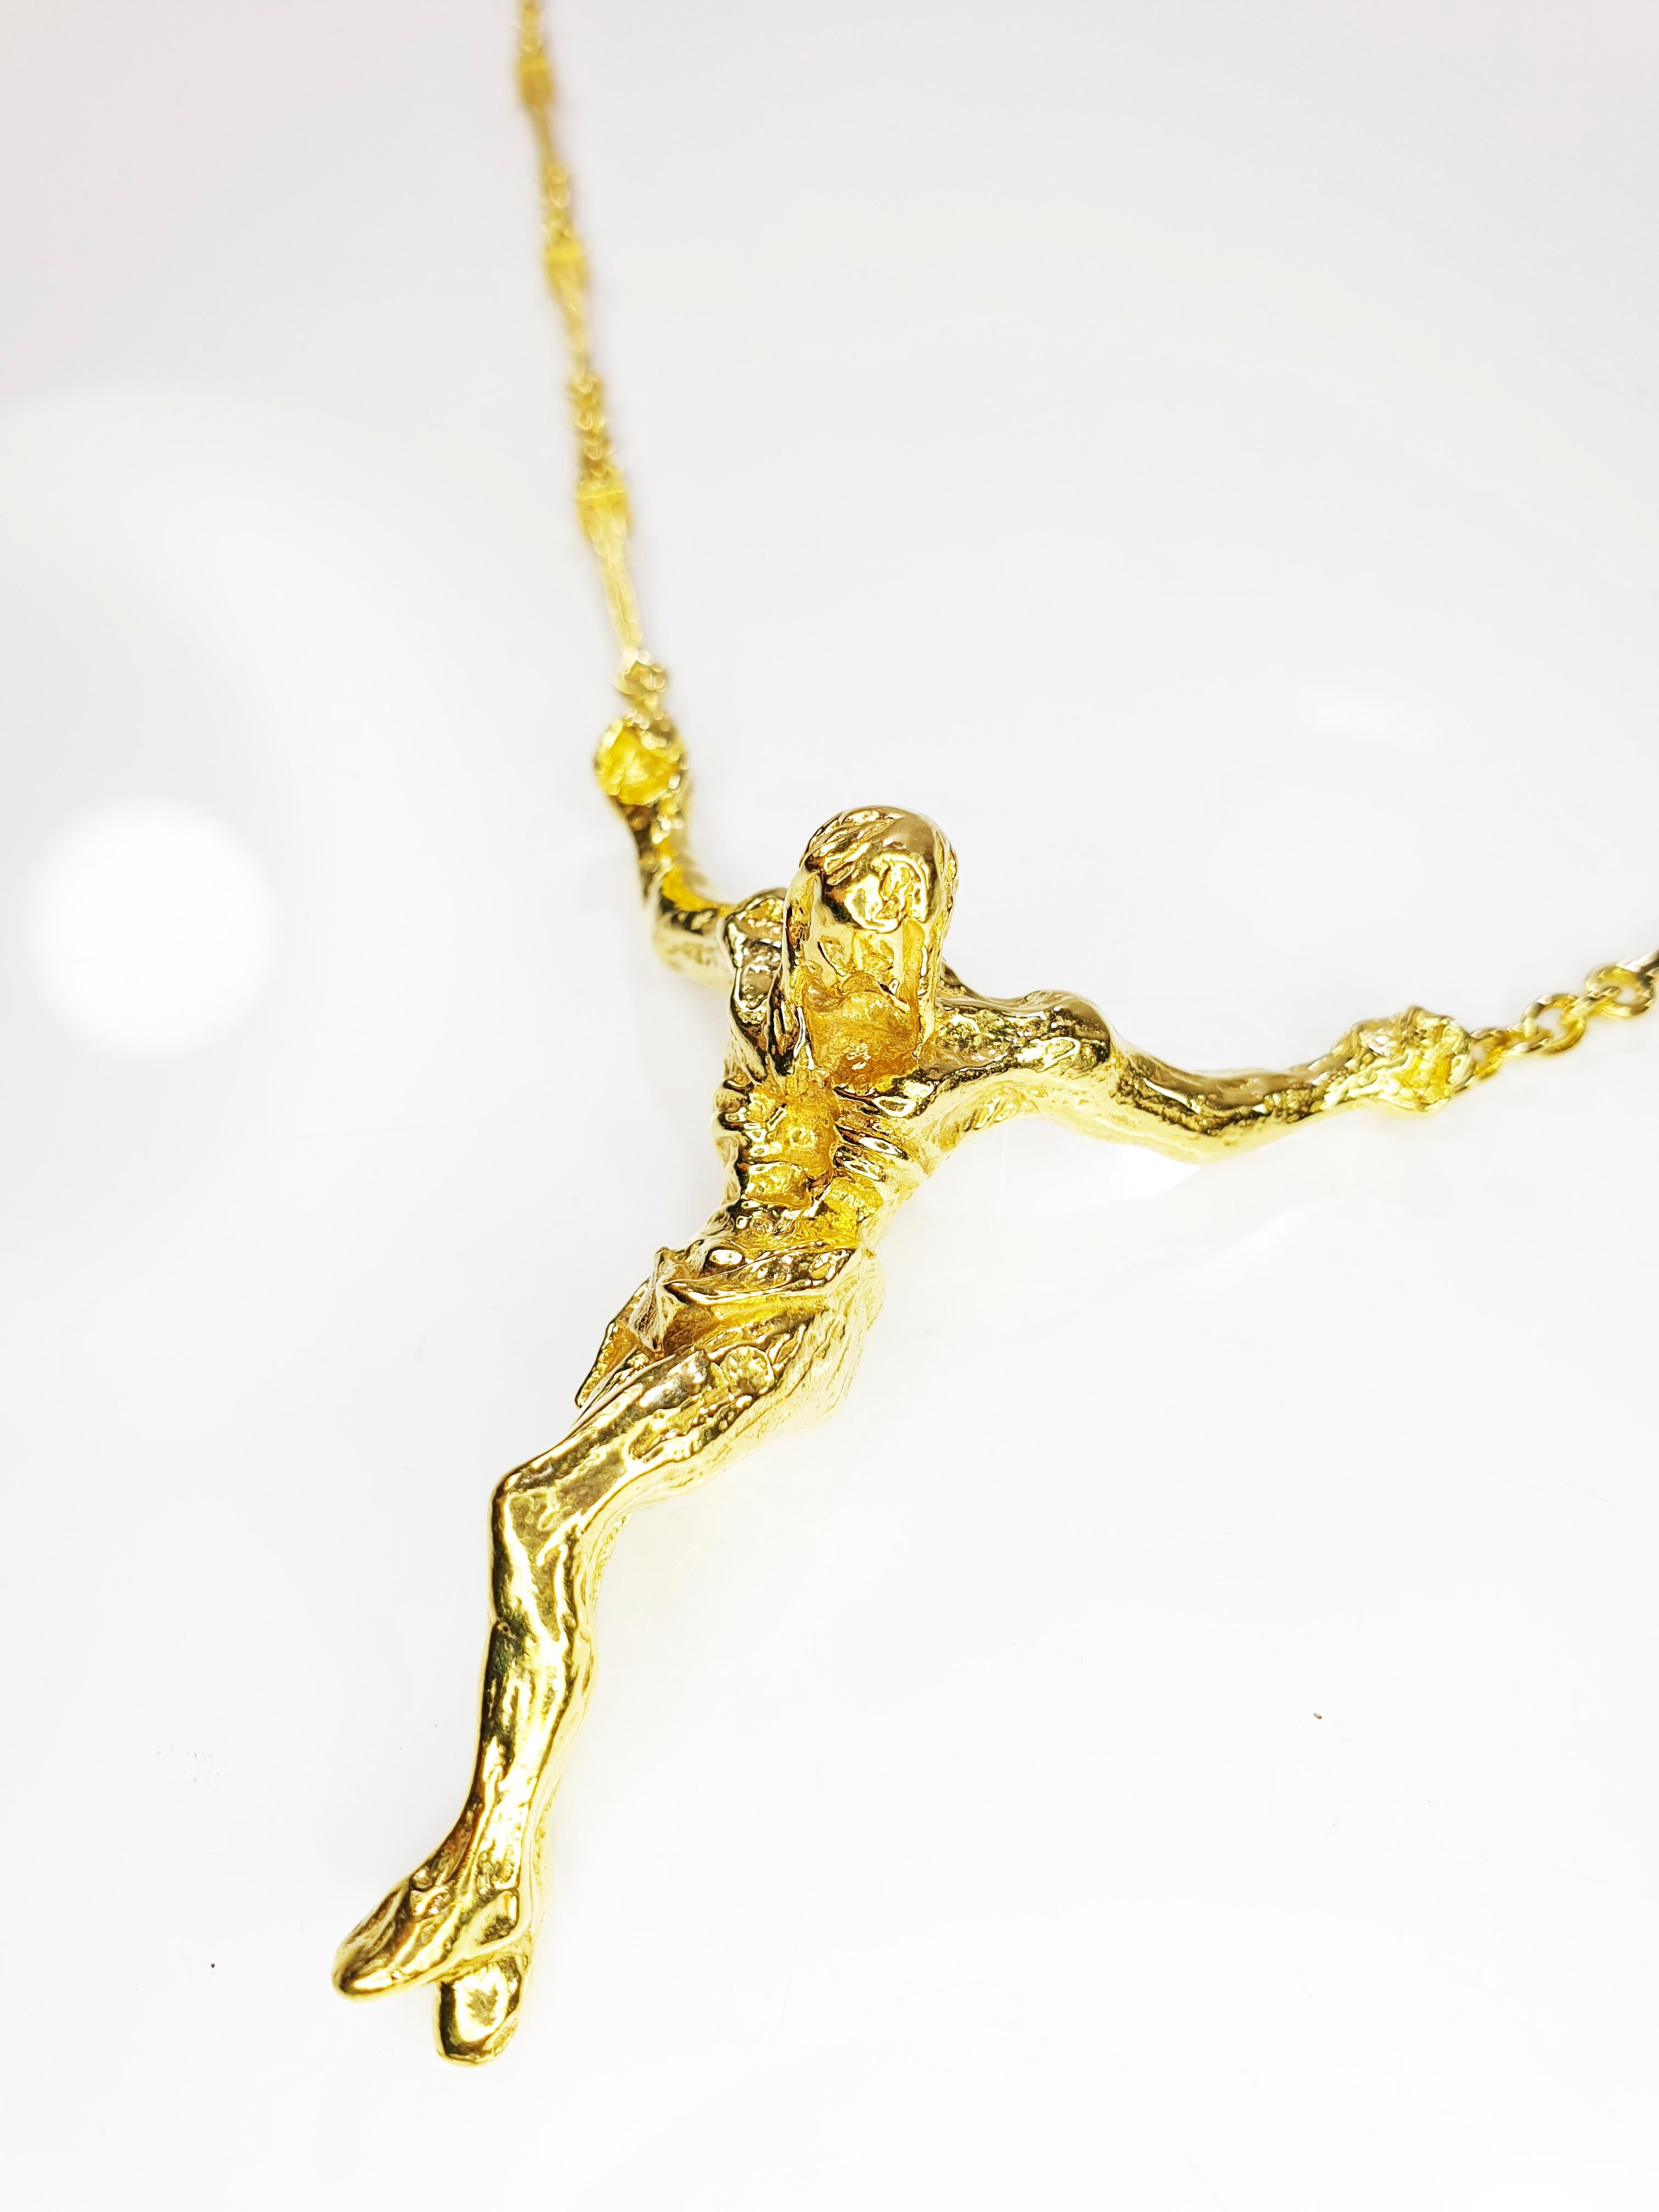 Limited Edition 18k Yellow Gold Salvador Dali Christ Saint John On The Cross Pendant Necklace / Bracelet 
This is a limited edition numbered piece from 1970's, number 108 out of 1000 ever made.
This necklace comes with a pouch and a frame for